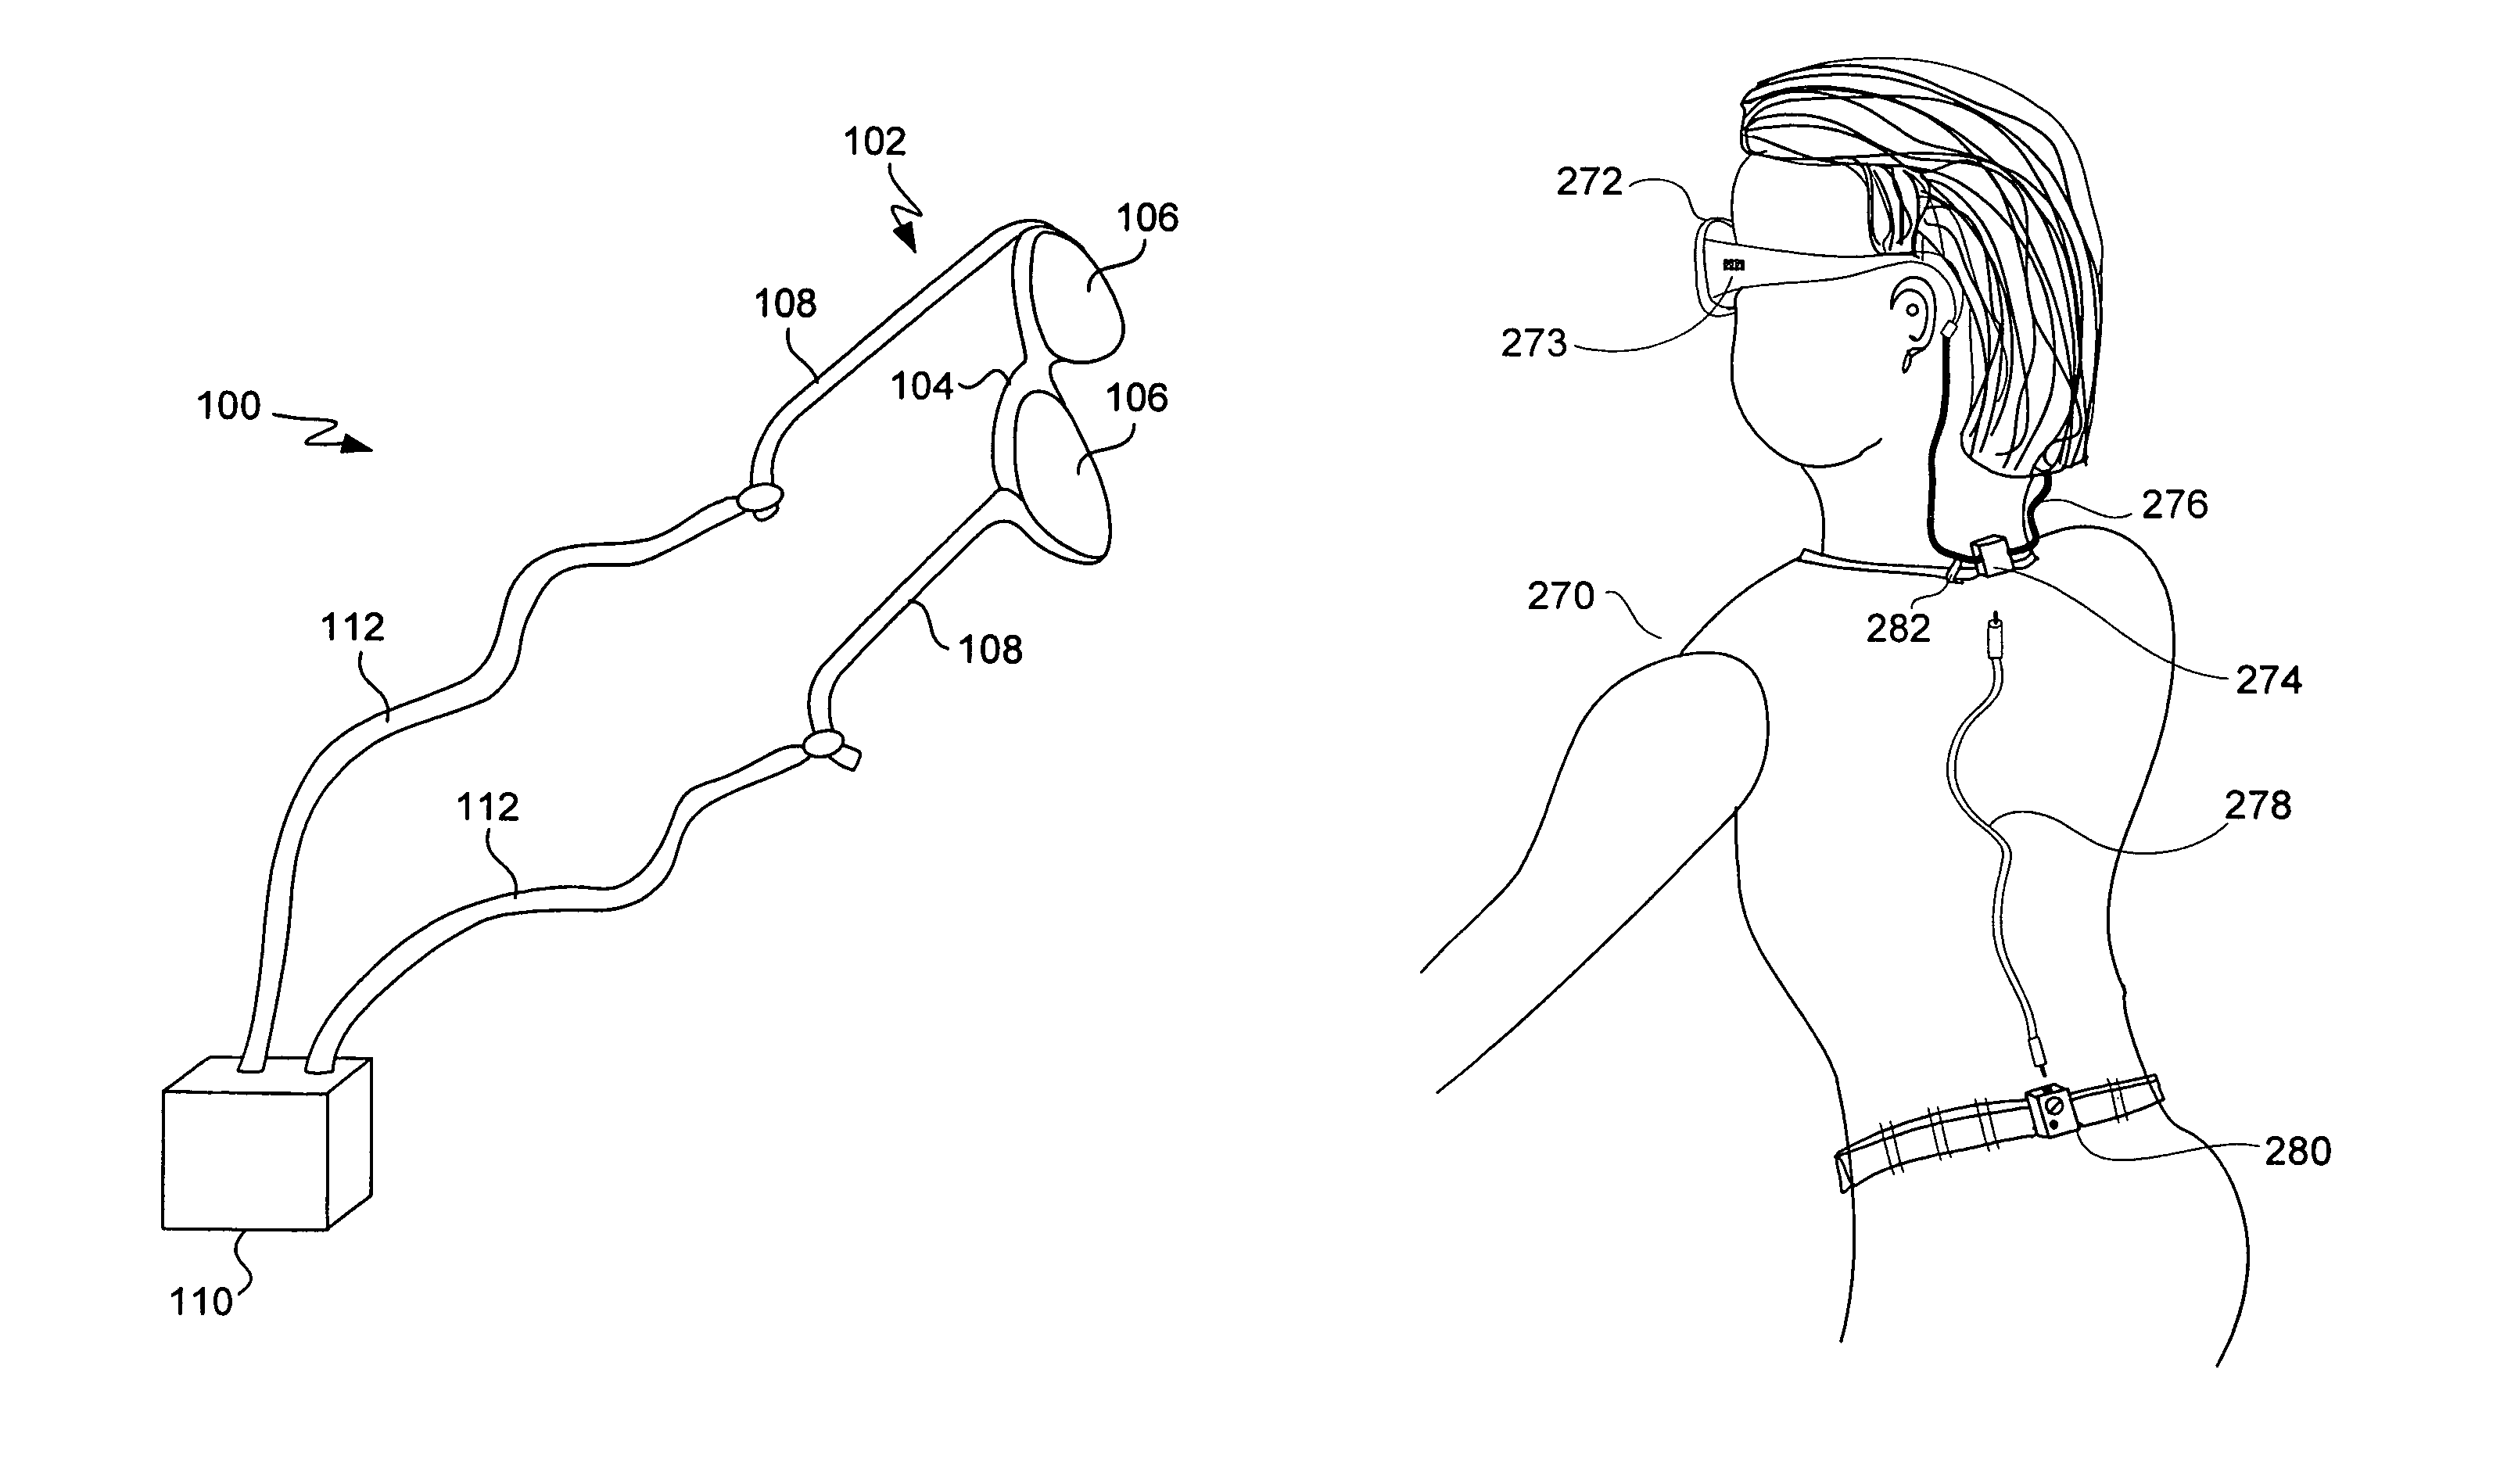 Tethered electrical components for eyeglasses